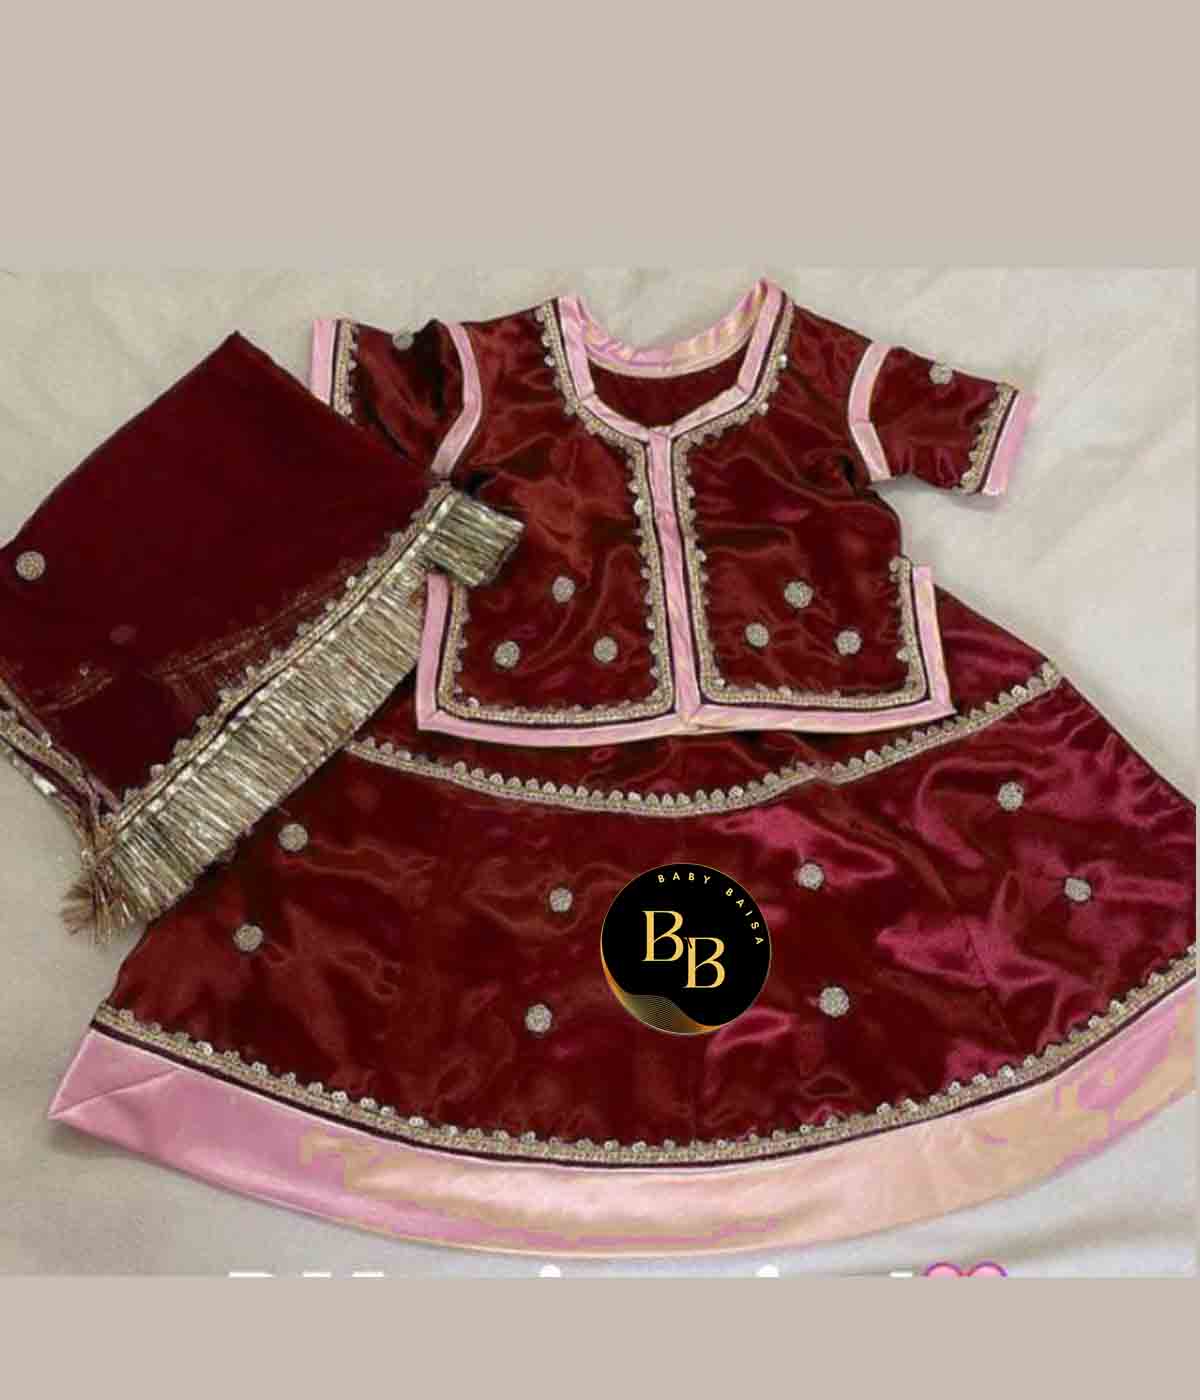 Stitched Girls Poshak in Maroon and PInk Color